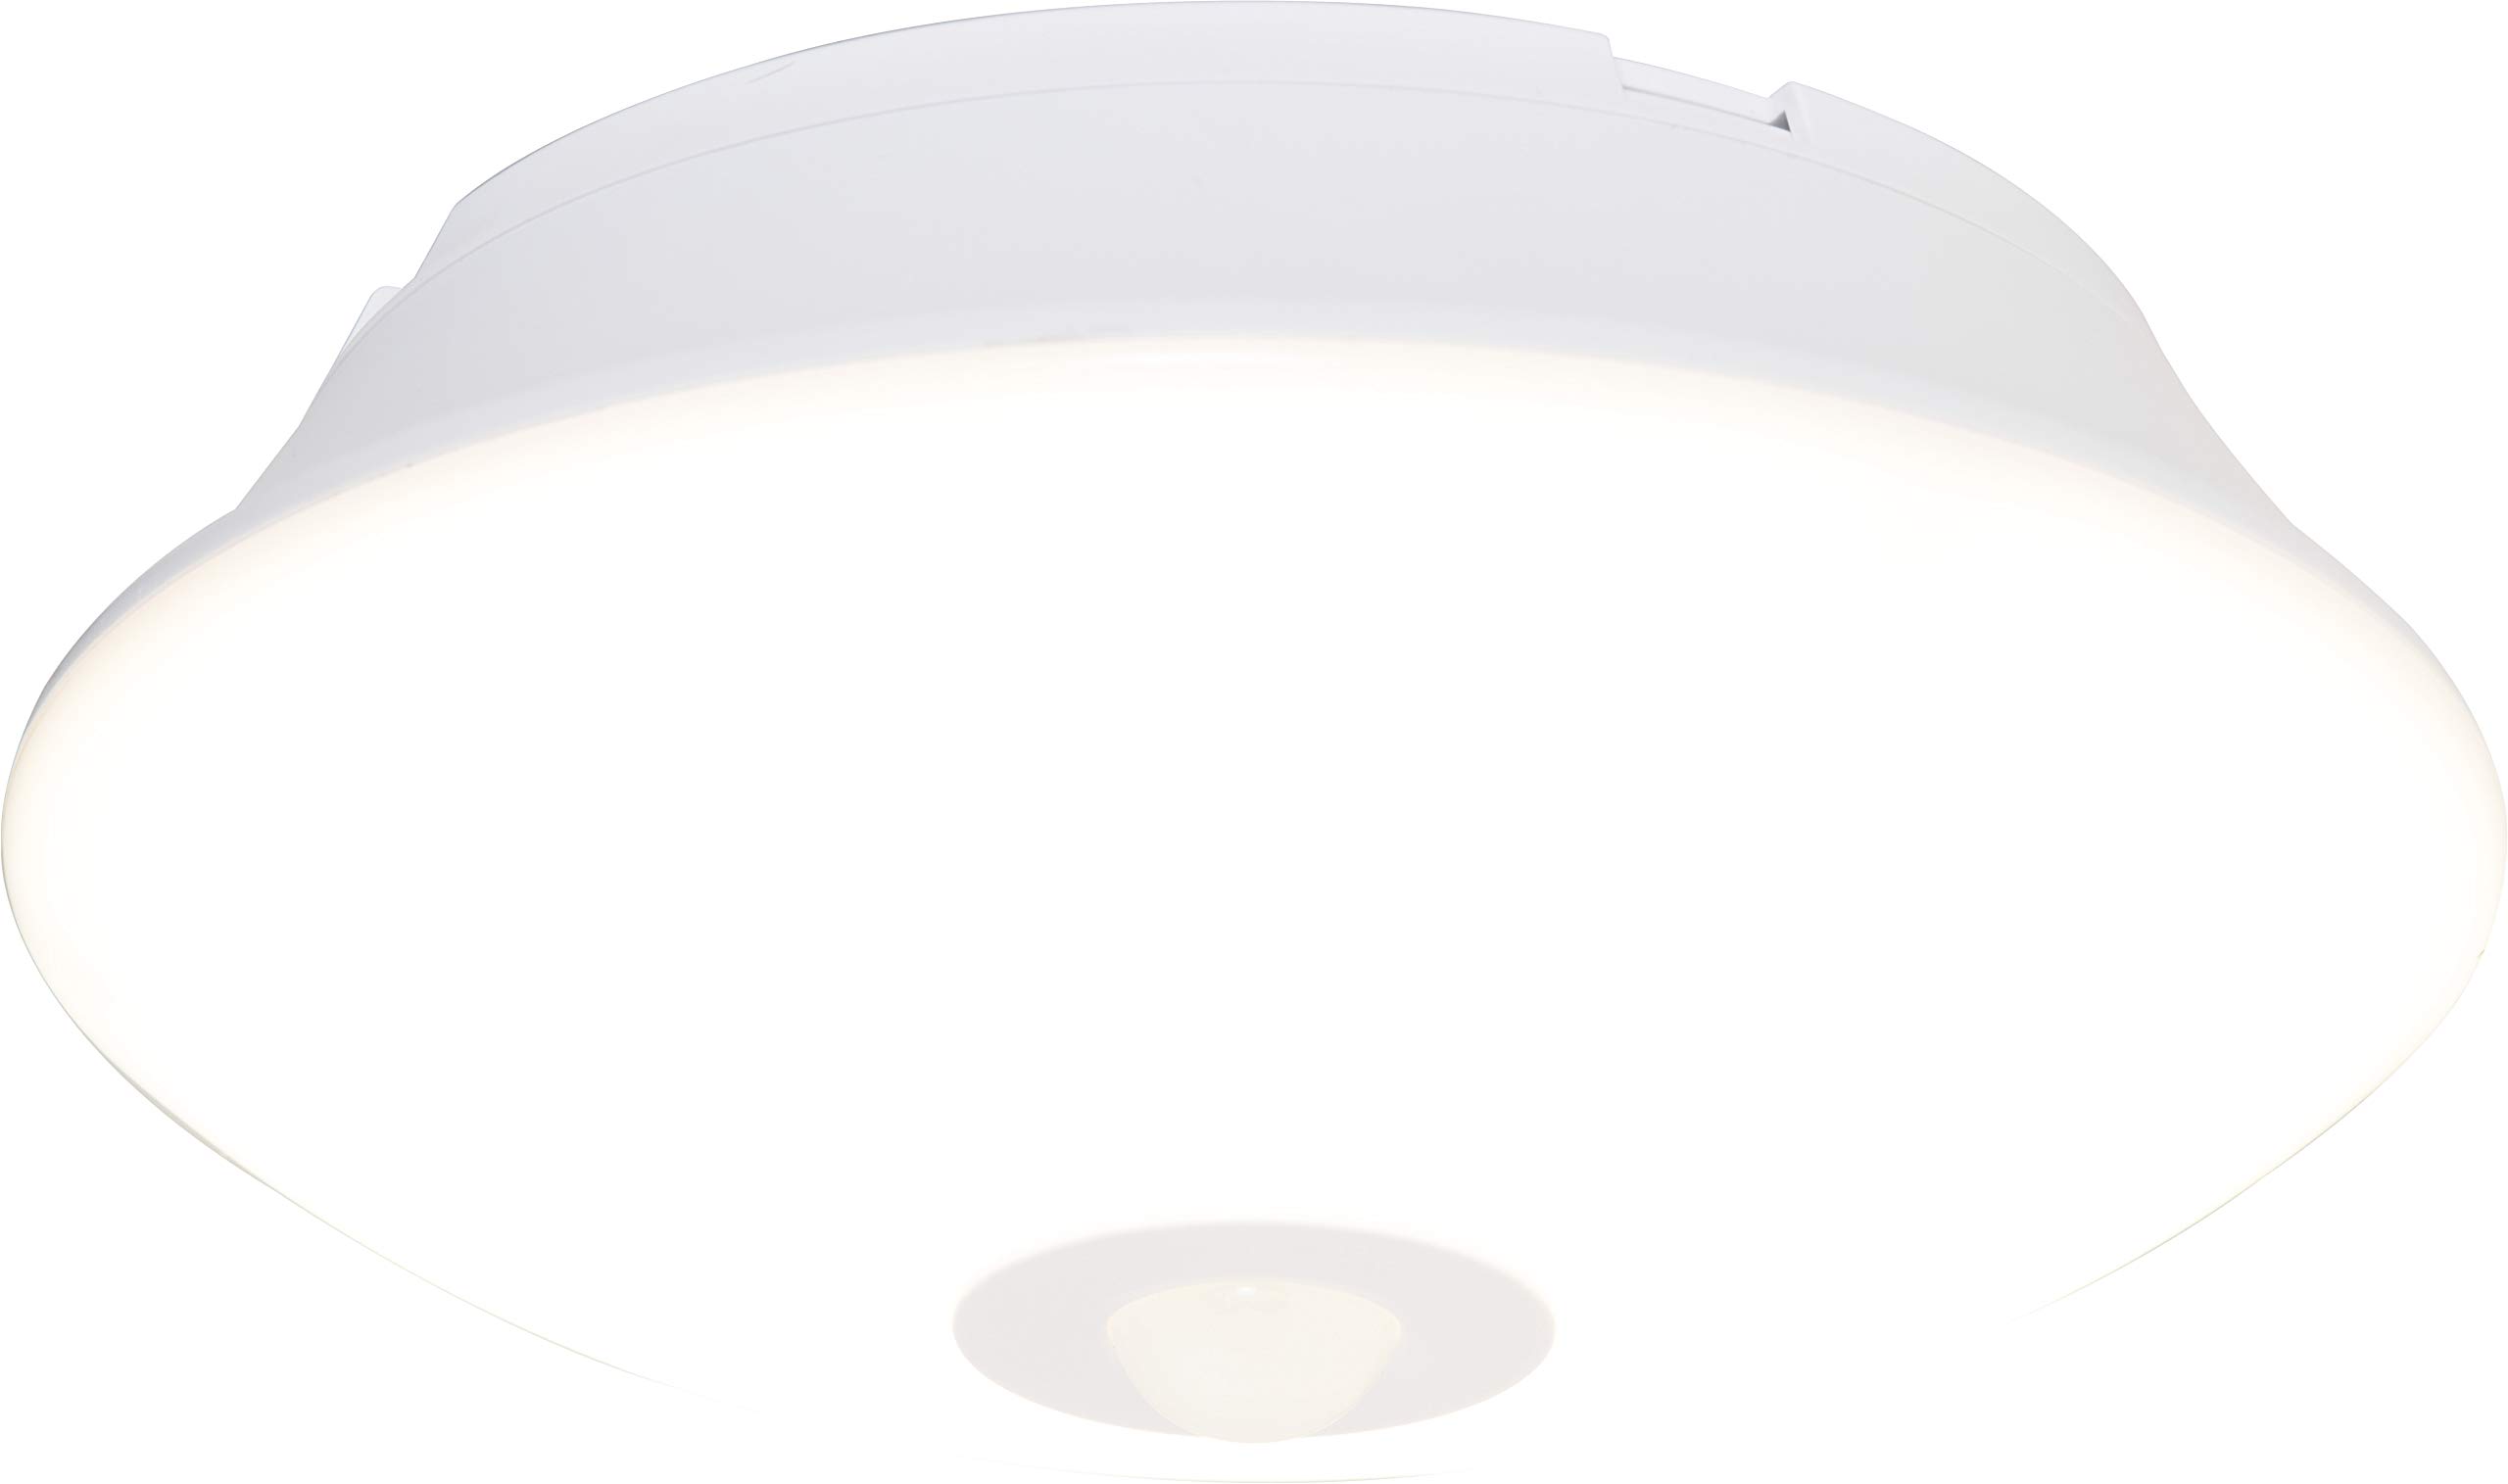 Energizer Activated LED Ceiling Light Battery Operated